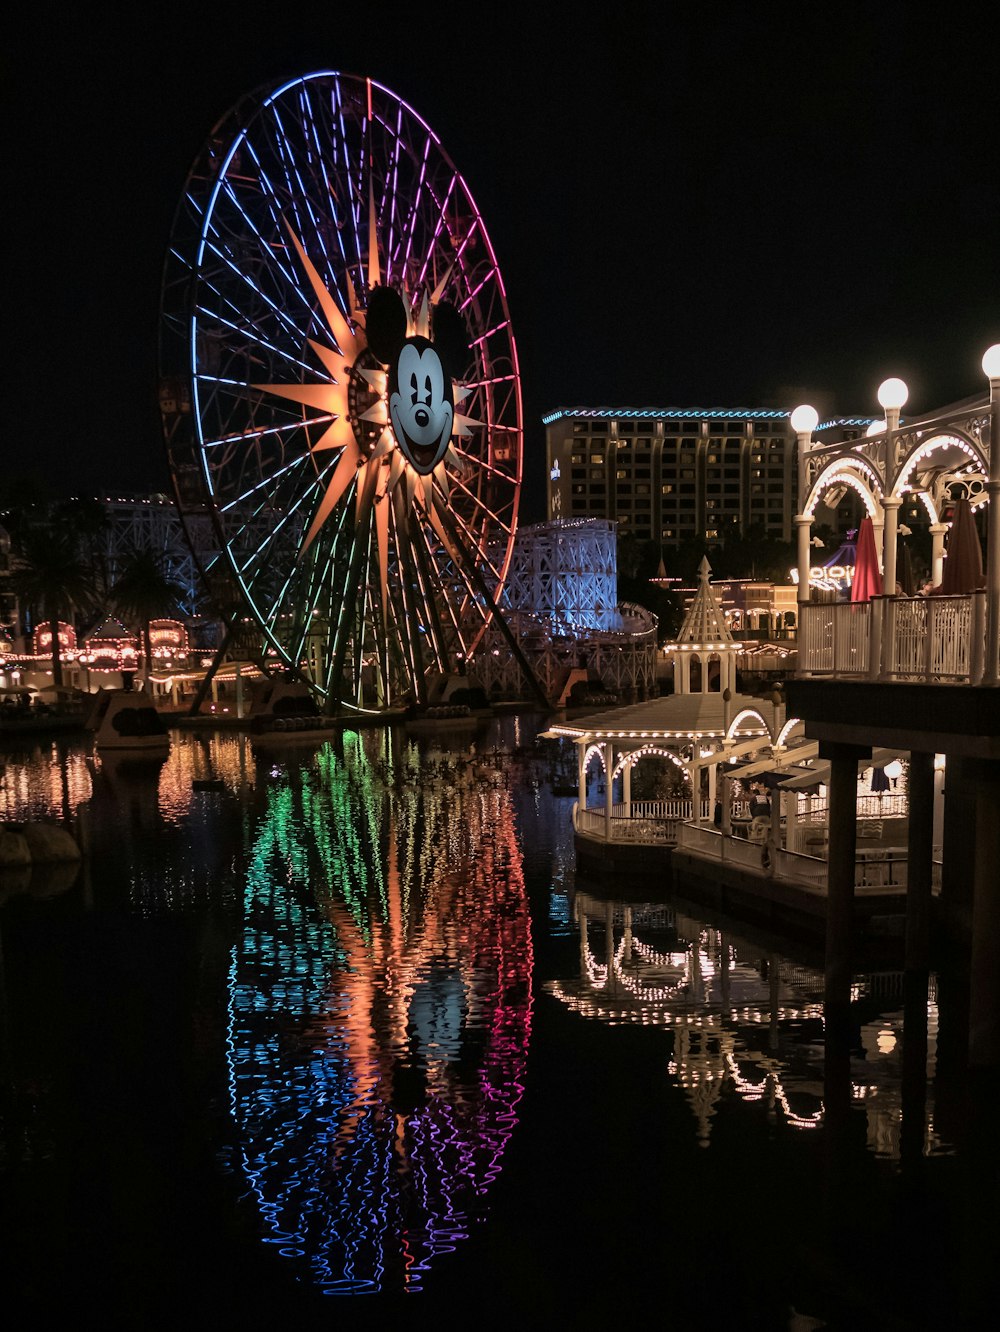 blue, pink, and orange Mickey Mouse ferries wheel at night time